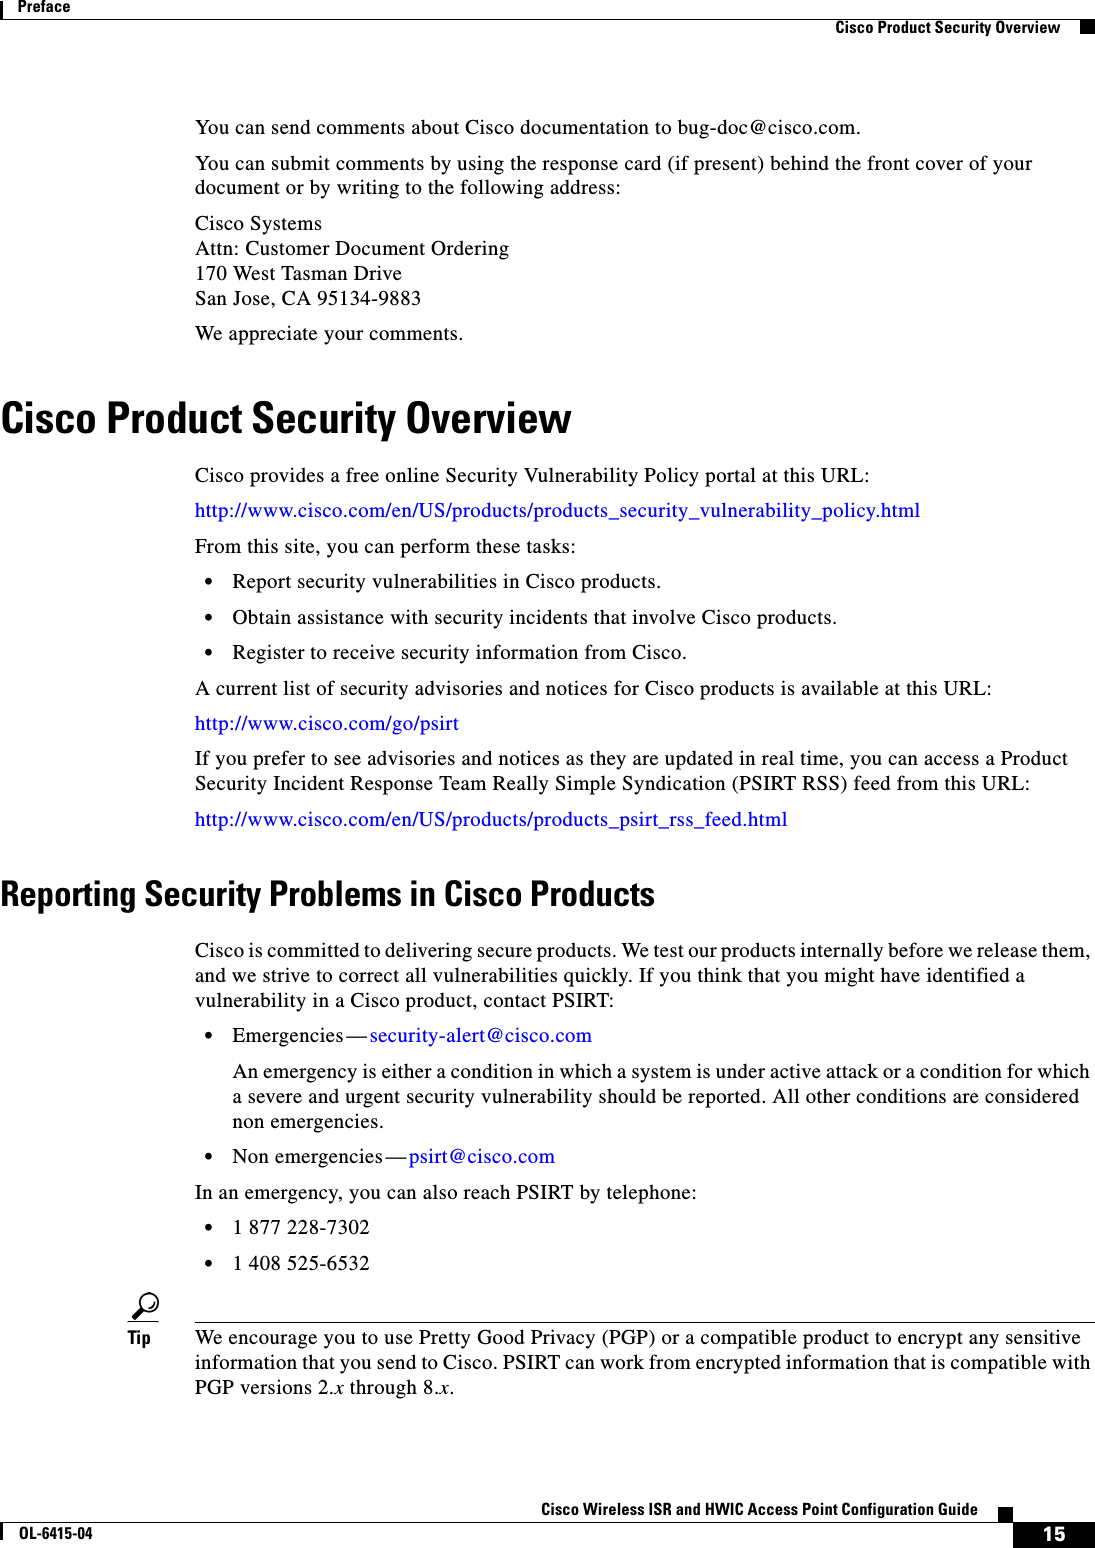  15Cisco Wireless ISR and HWIC Access Point Configuration GuideOL-6415-04PrefaceCisco Product Security OverviewYou can send comments about Cisco documentation to bug-doc@cisco.com.You can submit comments by using the response card (if present) behind the front cover of your document or by writing to the following address:Cisco Systems Attn: Customer Document Ordering 170 West Tasman Drive San Jose, CA 95134-9883We appreciate your comments.Cisco Product Security OverviewCisco provides a free online Security Vulnerability Policy portal at this URL:http://www.cisco.com/en/US/products/products_security_vulnerability_policy.htmlFrom this site, you can perform these tasks:  • Report security vulnerabilities in Cisco products.  • Obtain assistance with security incidents that involve Cisco products.  • Register to receive security information from Cisco.A current list of security advisories and notices for Cisco products is available at this URL:http://www.cisco.com/go/psirtIf you prefer to see advisories and notices as they are updated in real time, you can access a Product Security Incident Response Team Really Simple Syndication (PSIRT RSS) feed from this URL:http://www.cisco.com/en/US/products/products_psirt_rss_feed.htmlReporting Security Problems in Cisco ProductsCisco is committed to delivering secure products. We test our products internally before we release them, and we strive to correct all vulnerabilities quickly. If you think that you might have identified a vulnerability in a Cisco product, contact PSIRT:  • Emergencies — security-alert@cisco.comAn emergency is either a condition in which a system is under active attack or a condition for which a severe and urgent security vulnerability should be reported. All other conditions are considered non emergencies.  • Non emergencies — psirt@cisco.comIn an emergency, you can also reach PSIRT by telephone:  • 1 877 228-7302  • 1 408 525-6532Tip We encourage you to use Pretty Good Privacy (PGP) or a compatible product to encrypt any sensitive information that you send to Cisco. PSIRT can work from encrypted information that is compatible with PGP versions 2.x through 8.x. 